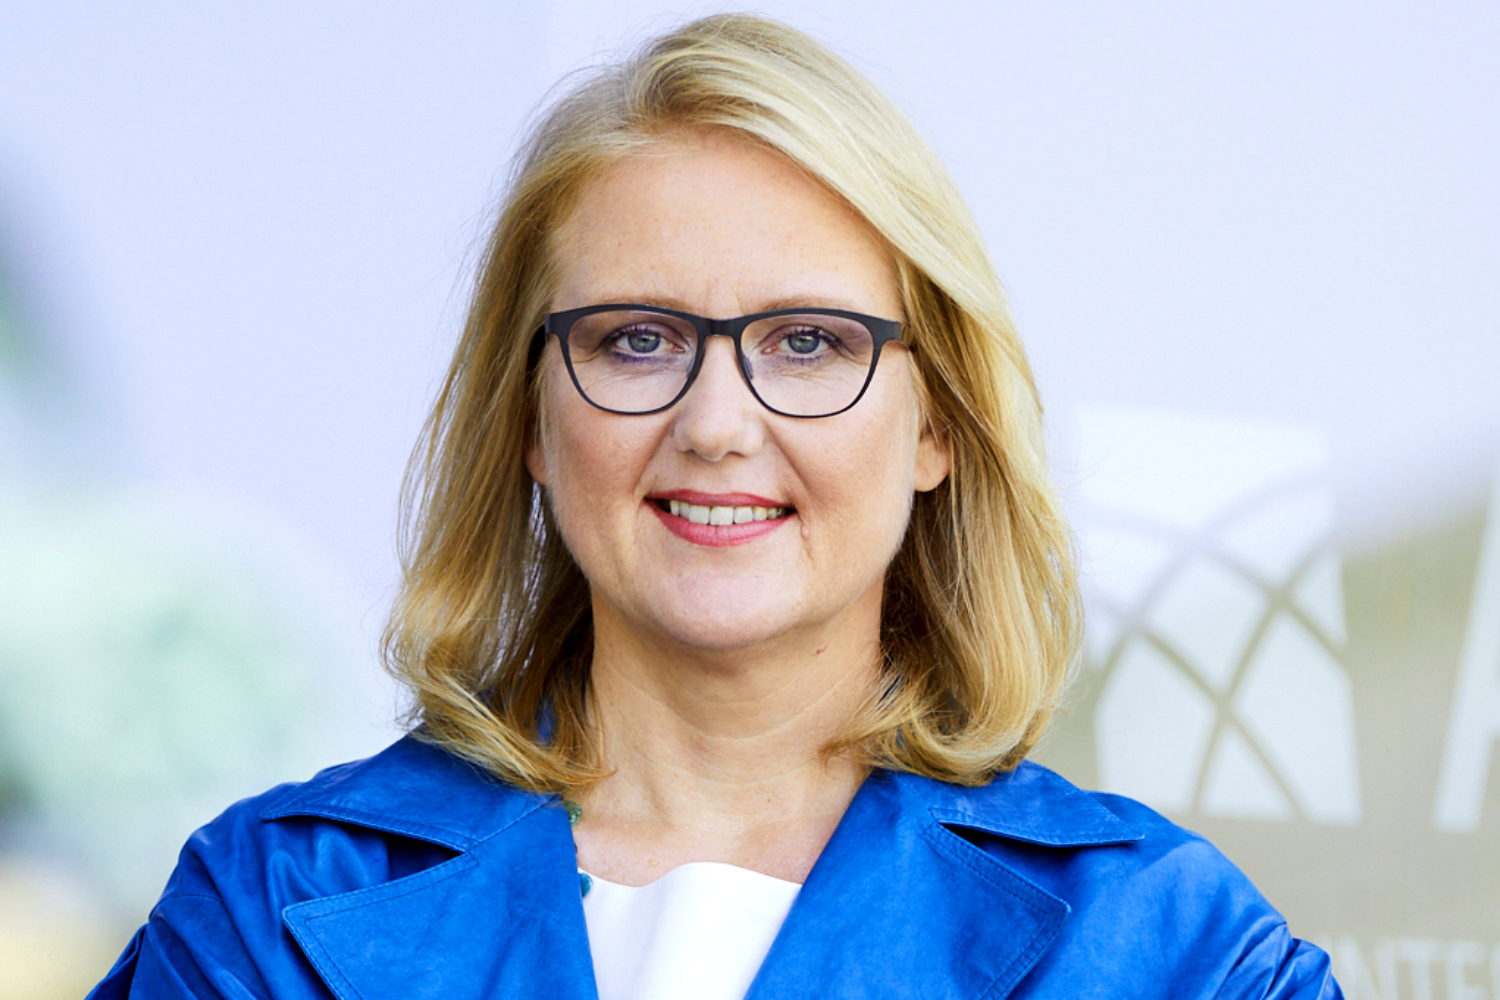 Lisa Paus is Federal Minister for Family Affairs, Senior Citizens, Women and Youth.